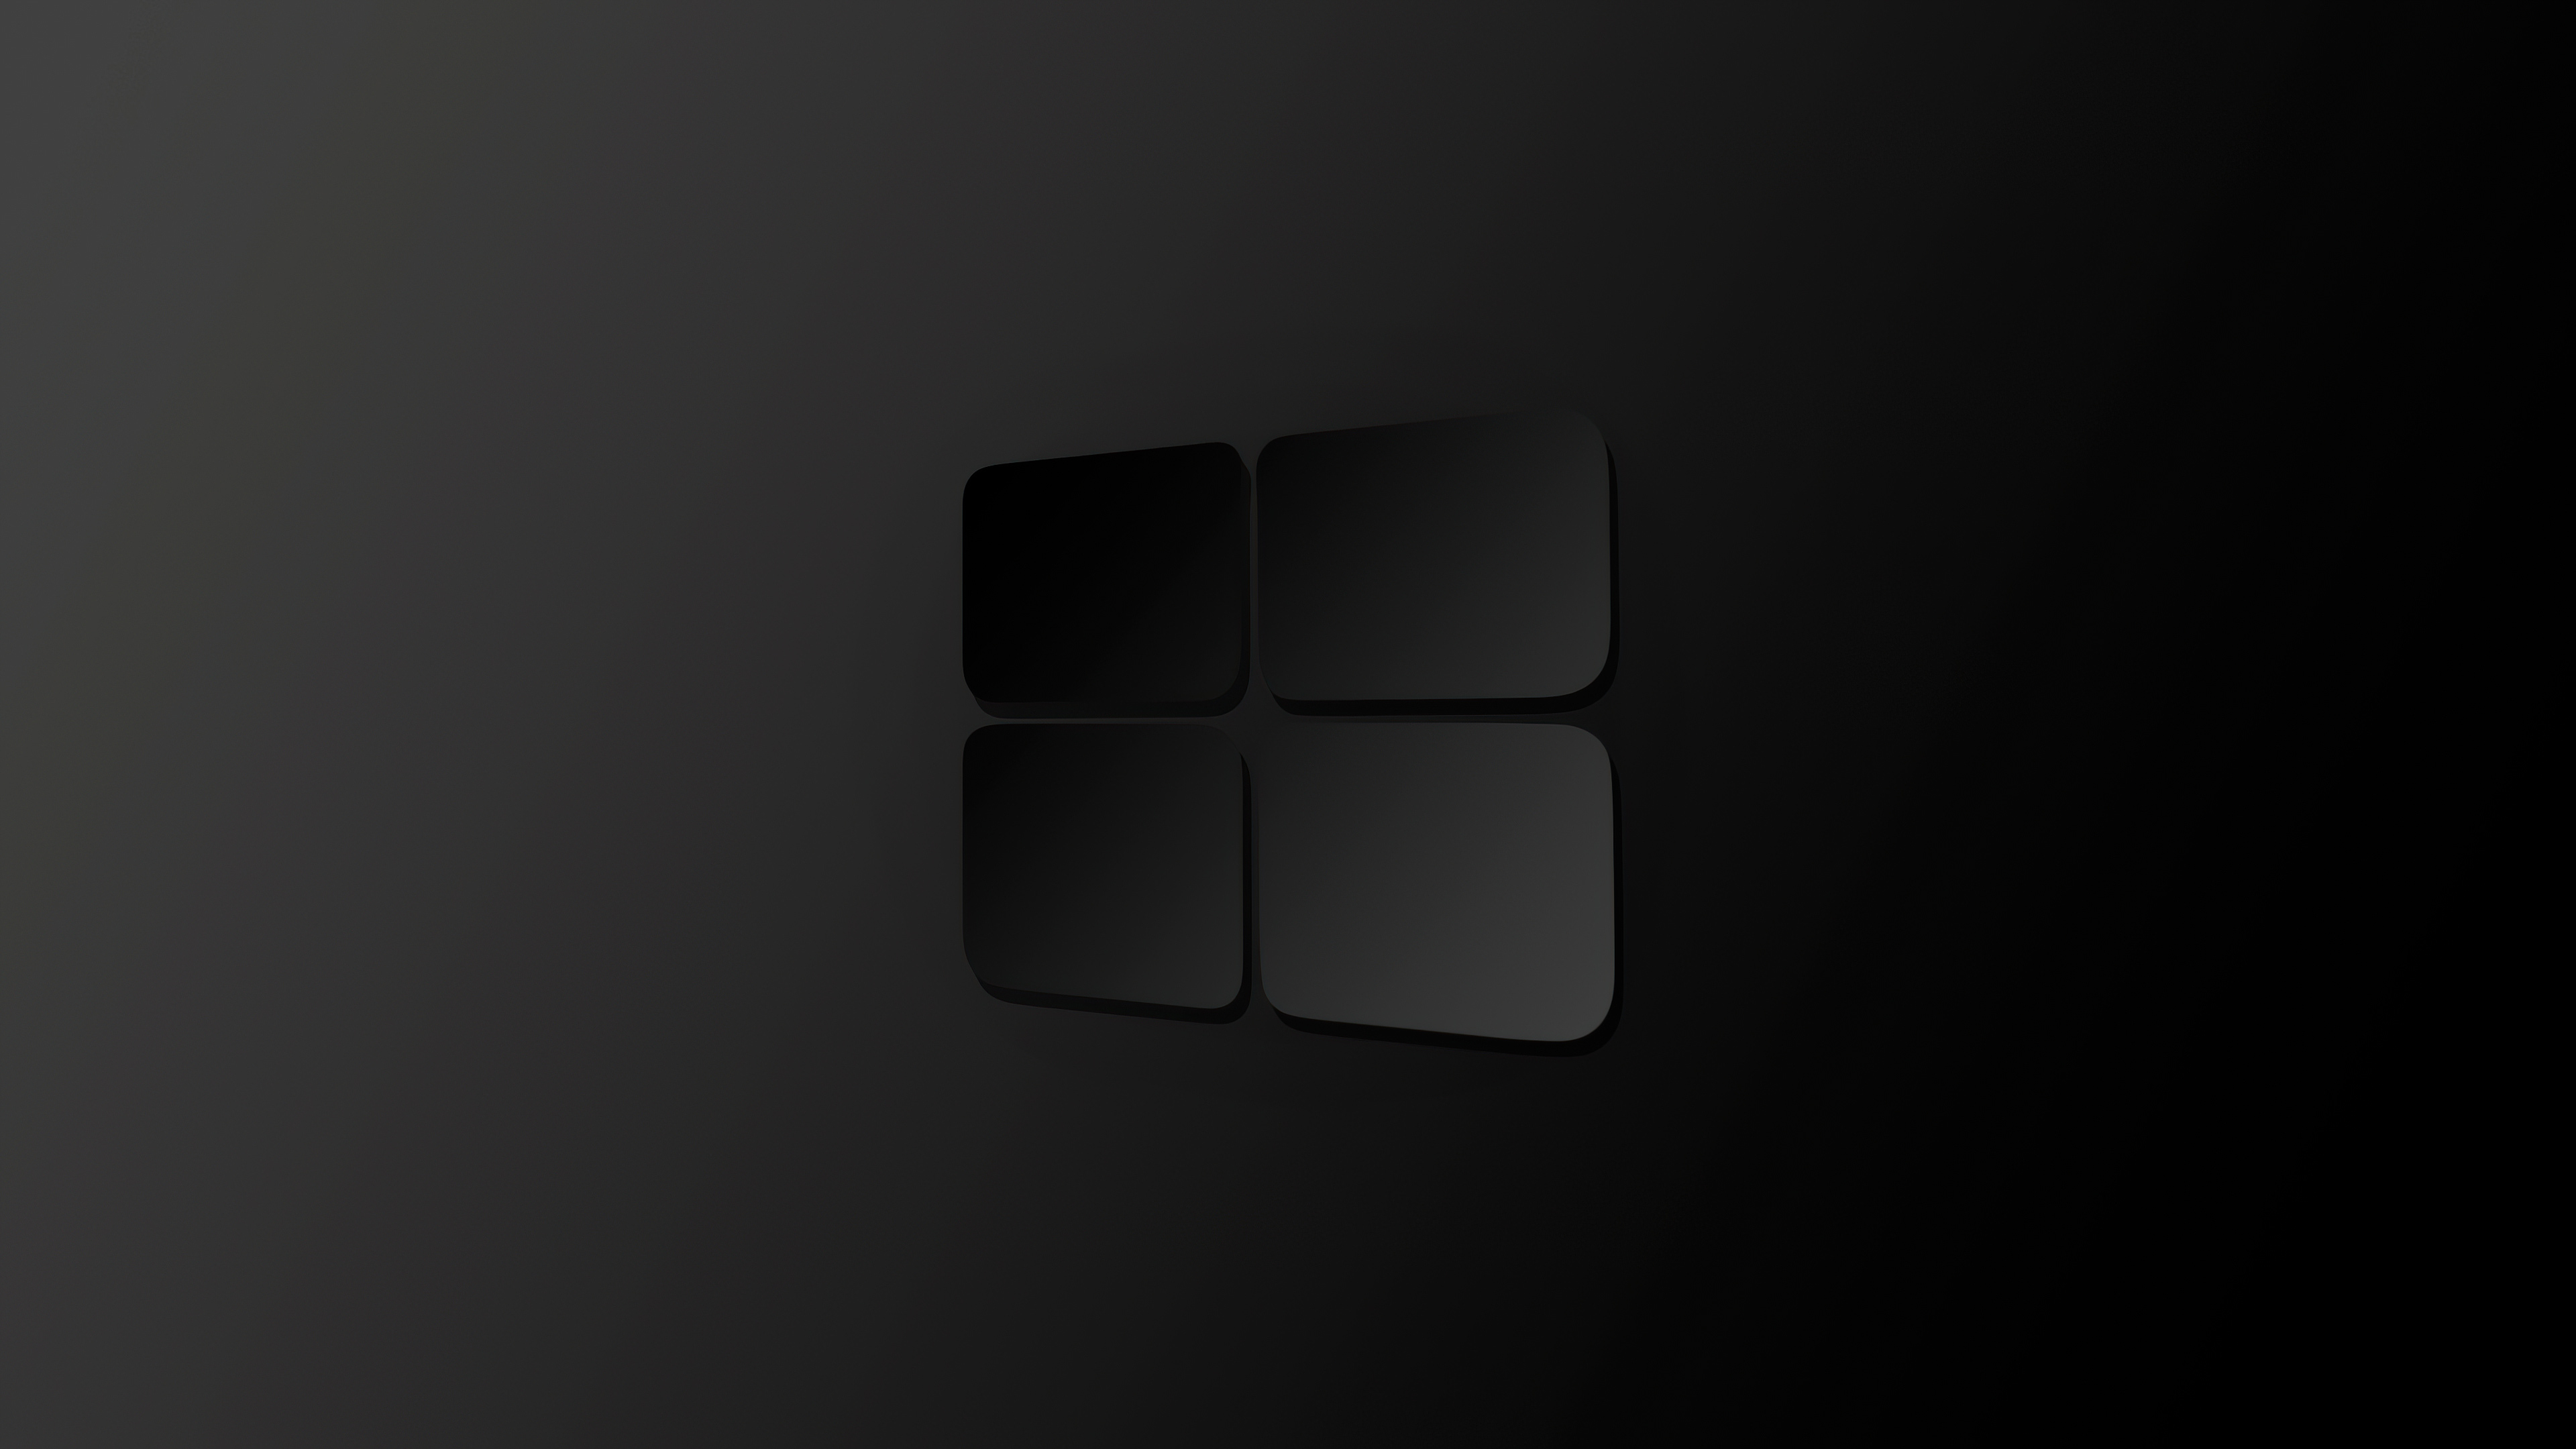 3840x2160 Windows 10 Darkness Logo 4k 4k HD 4k Wallpapers, Images,  Backgrounds, Photos and Pictures